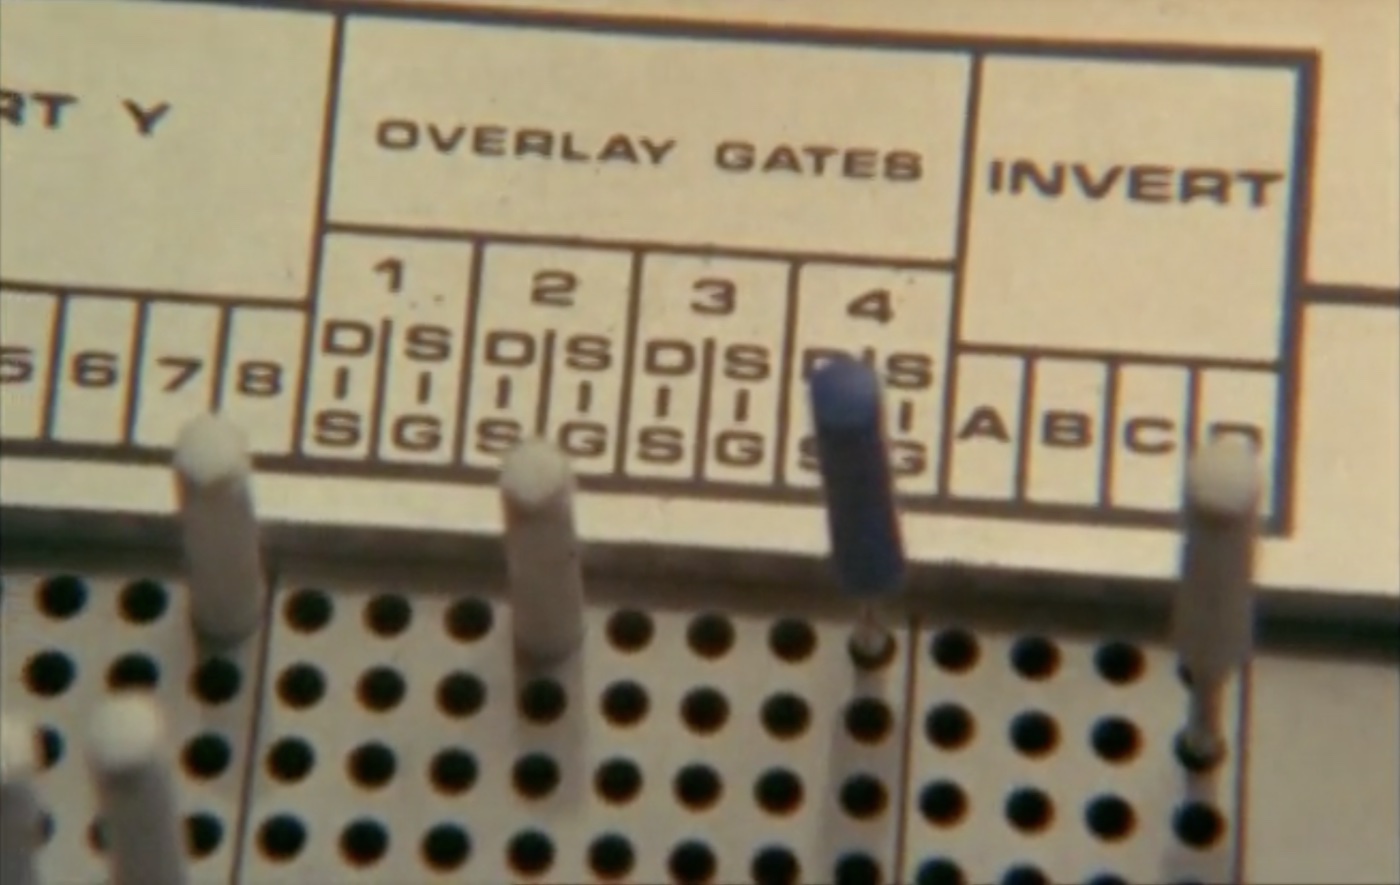 Analog electronic equipment 
			of some kind with words 'overlay gates' and 'invert' printed above gride of holes, a few filled with pegs.